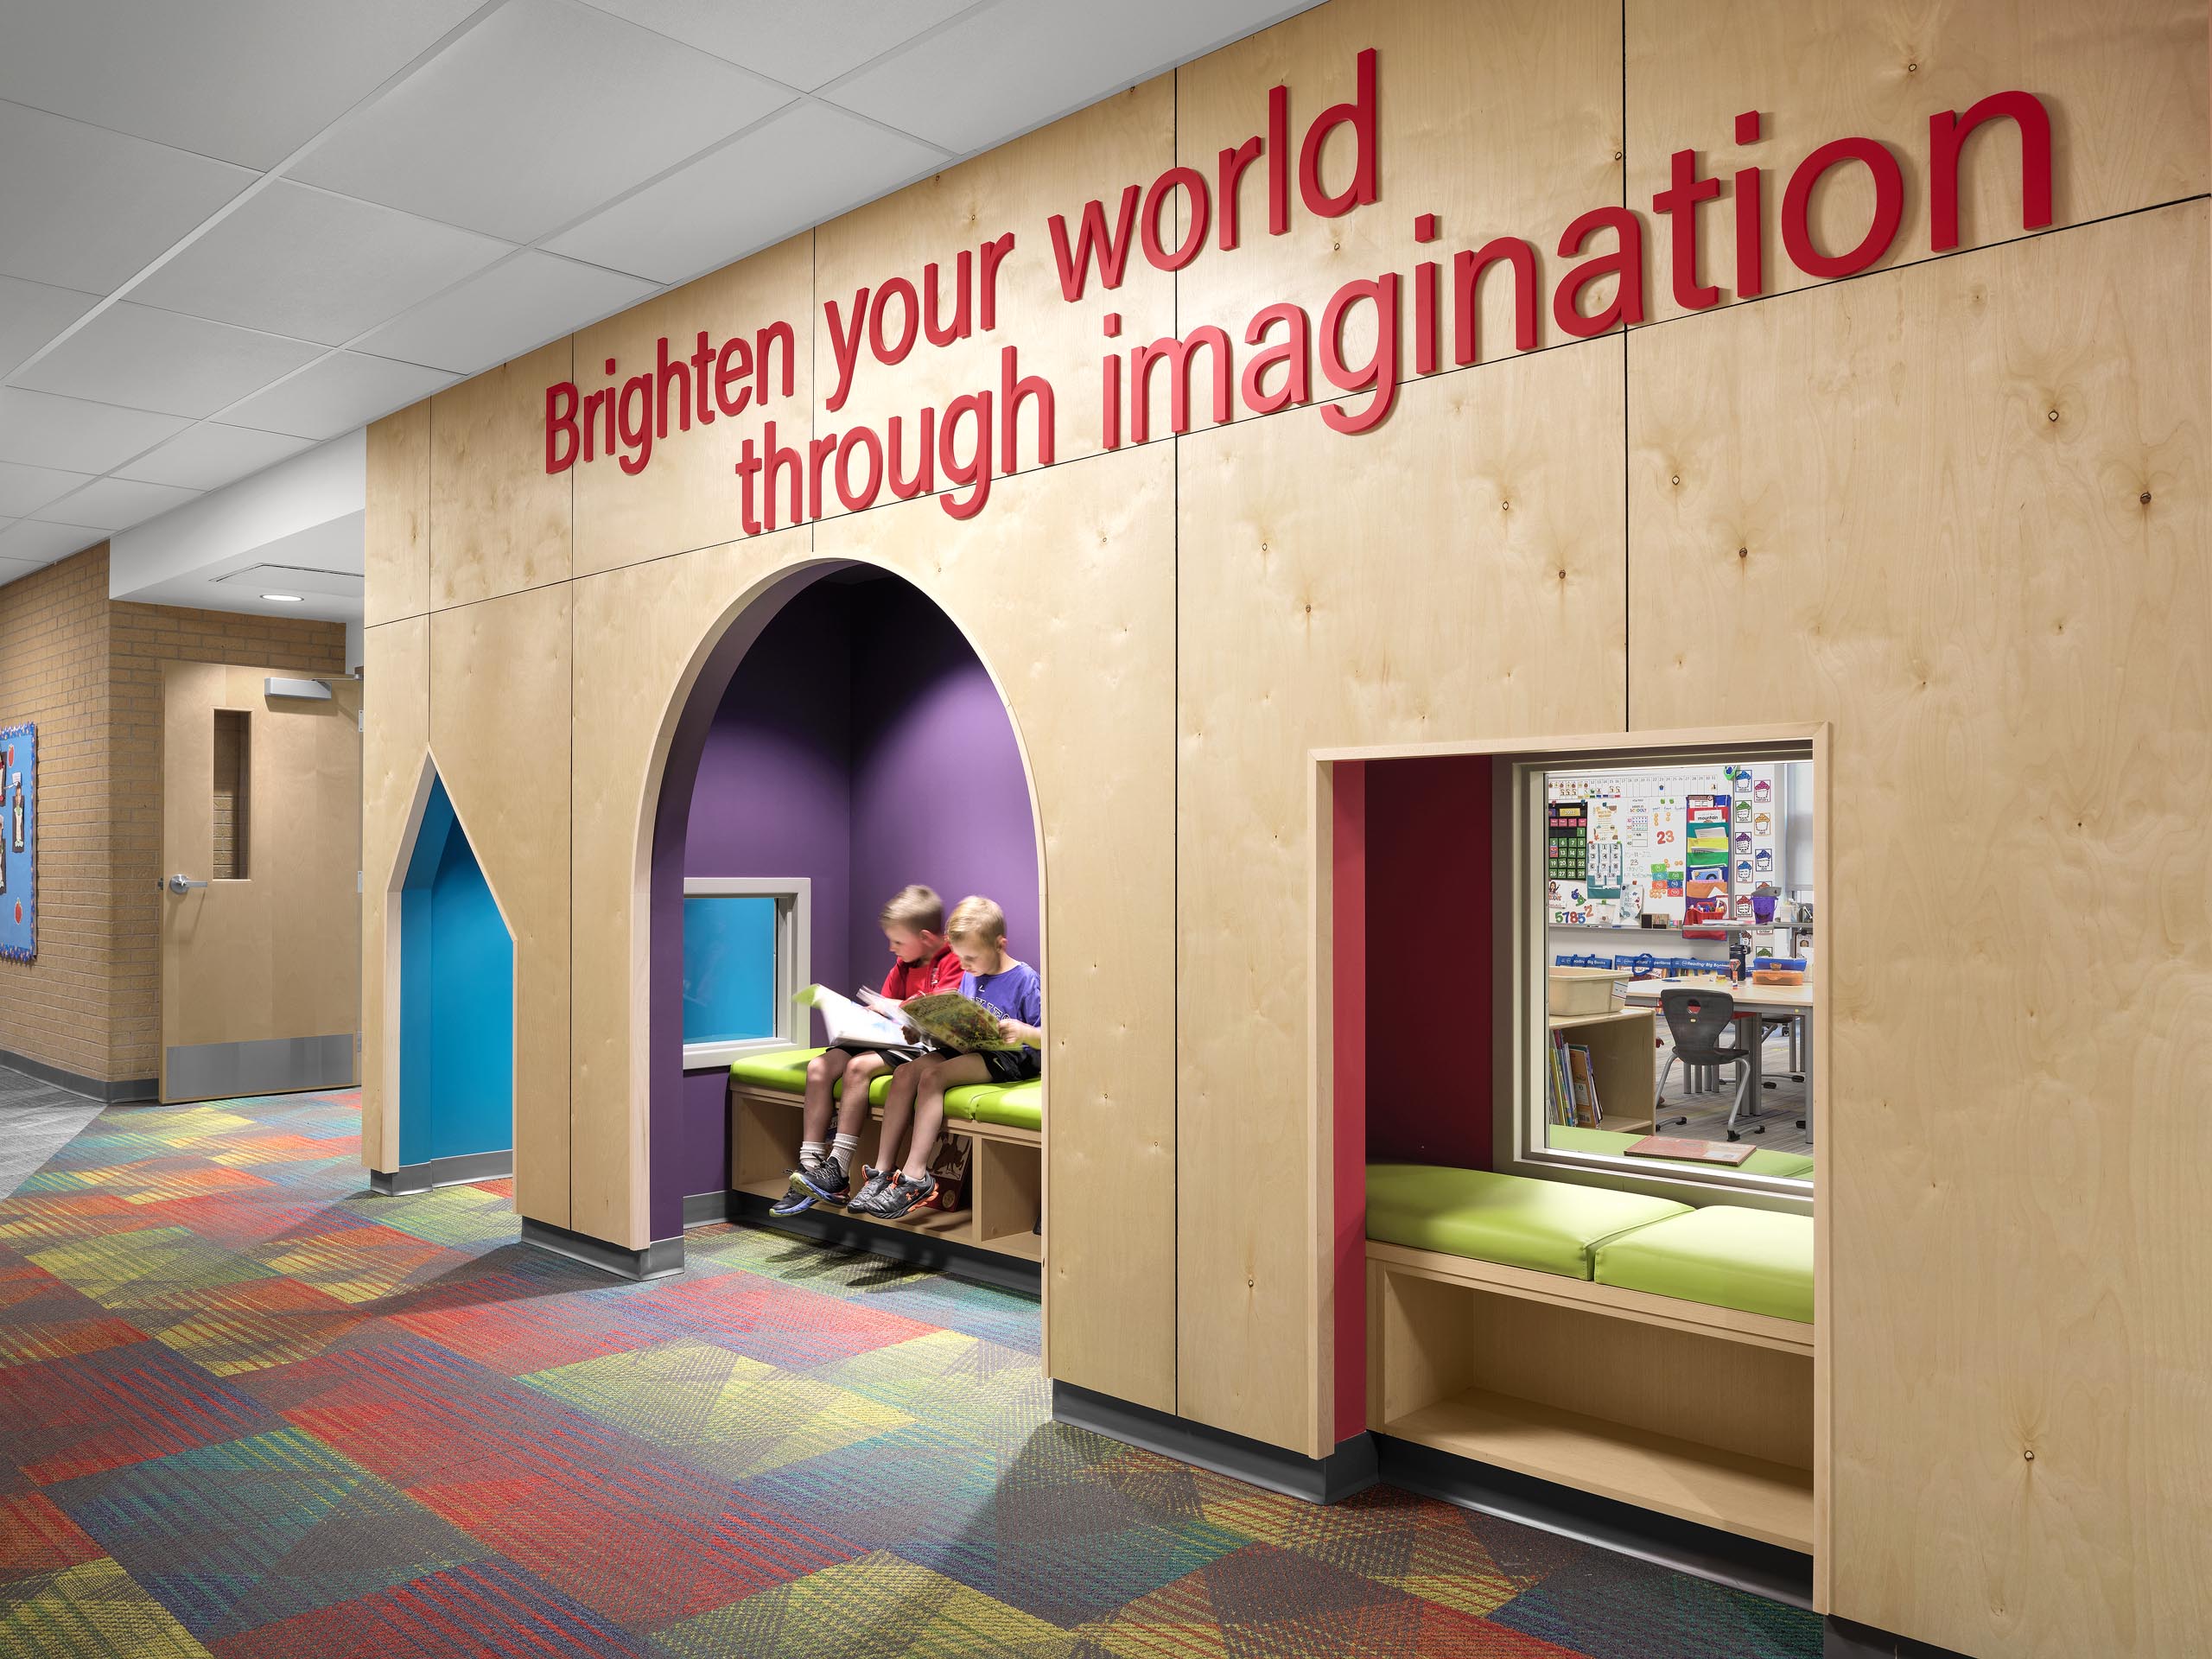 Architectural photography by Warren Diggles. Eaton Elementary students reading in colorful nook built into existing hallway. K-12 remodel project by RB+B Architects and FCI Constructors.